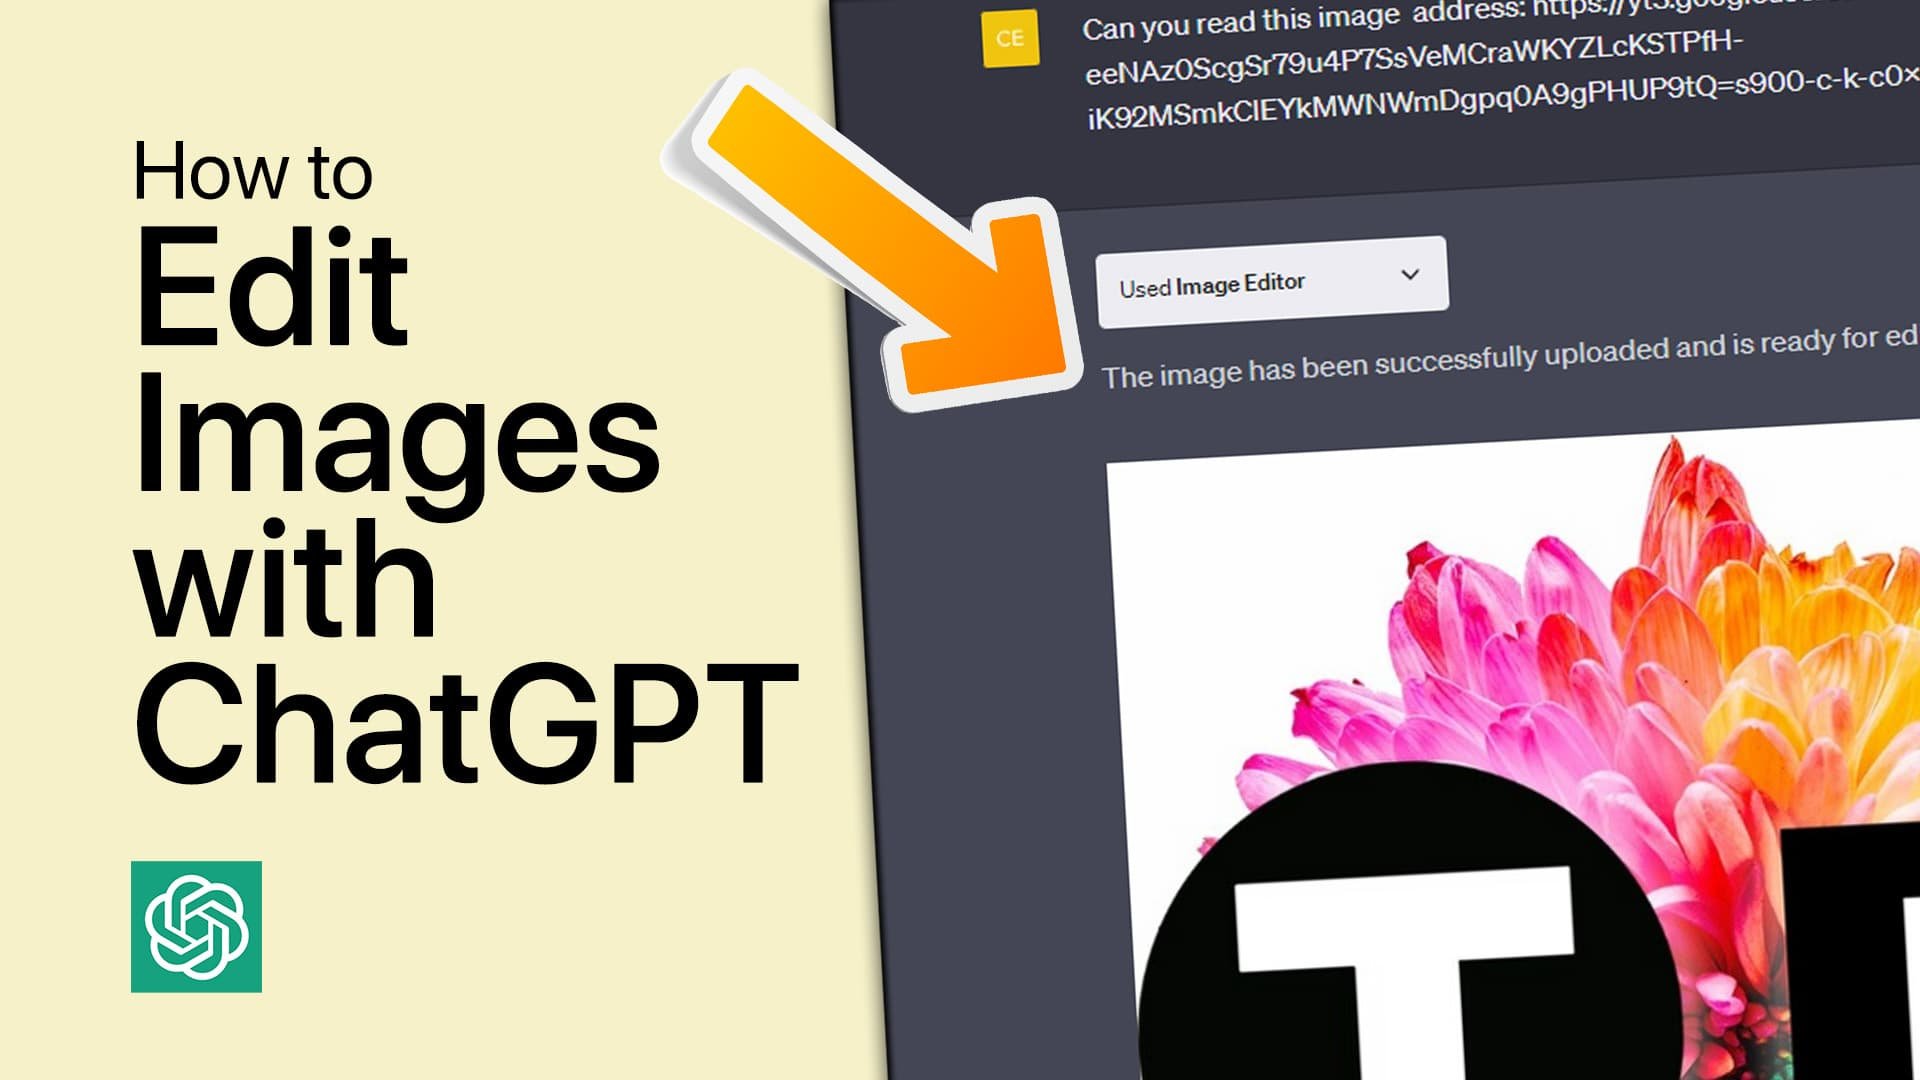 How To Edit Improve Images With ChatGPT Image Editor Plugin Tech How